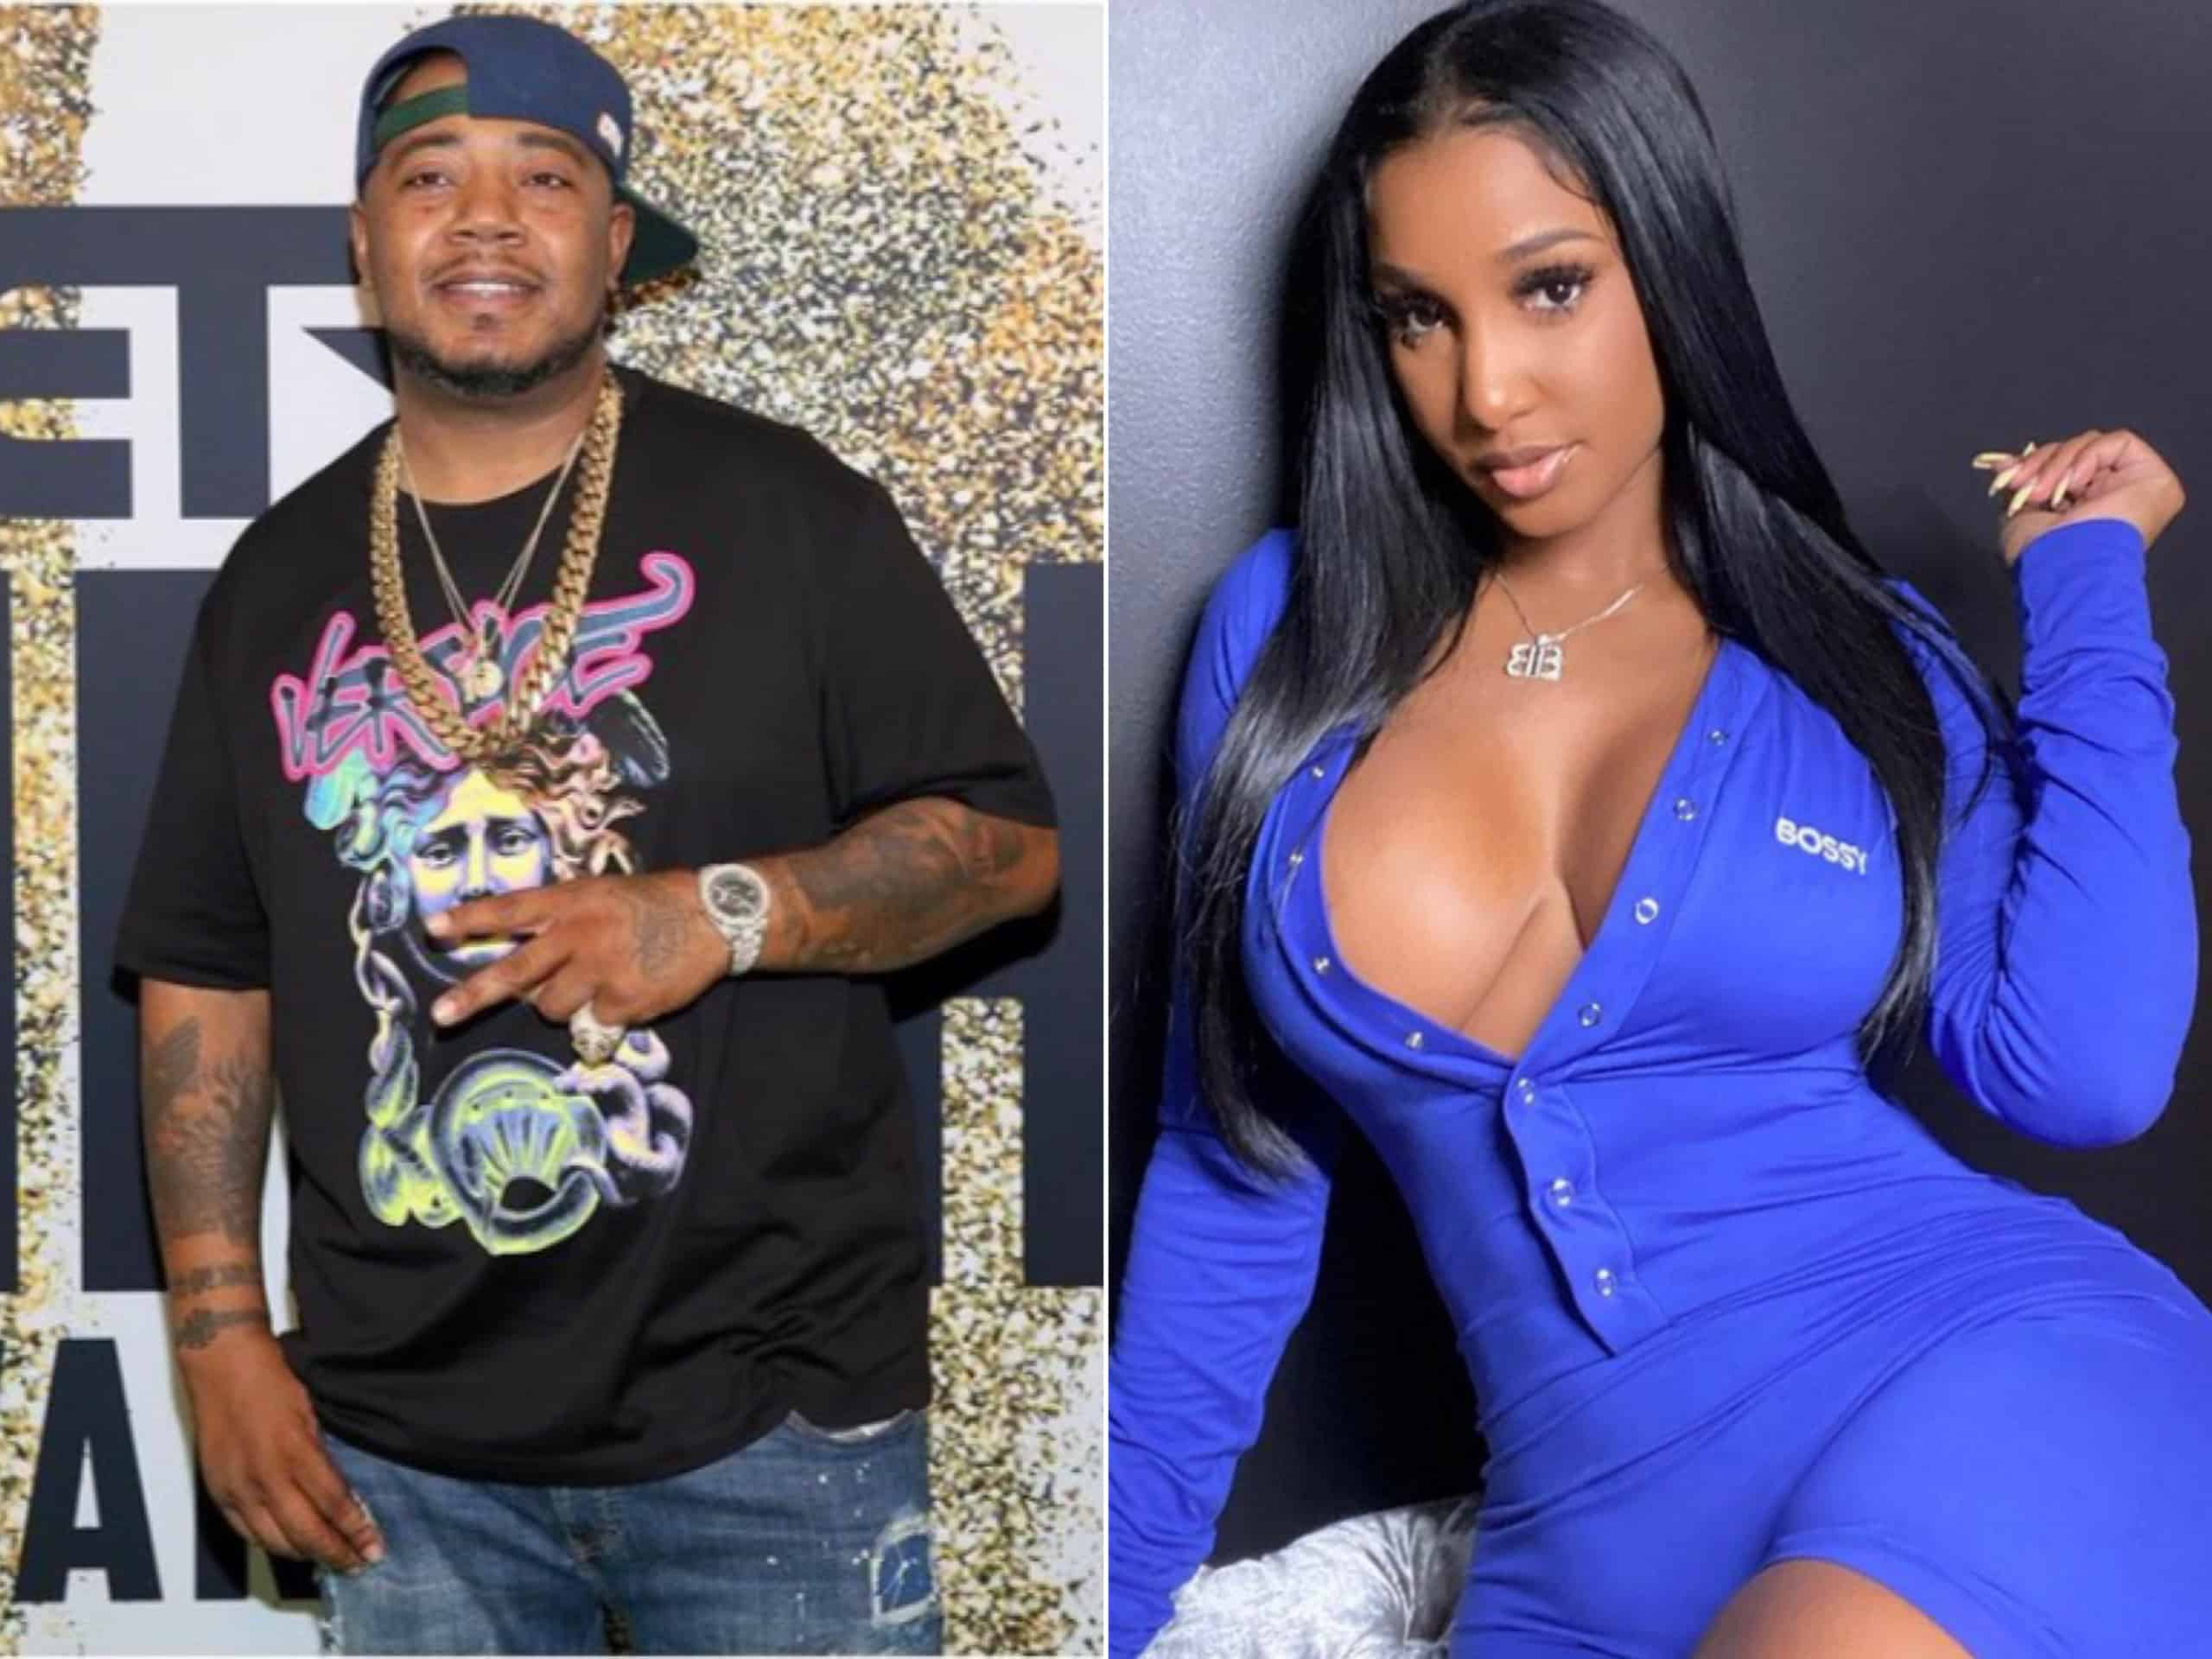 Bernice Burgos responds after Twista posted and deleted a viral post that c...